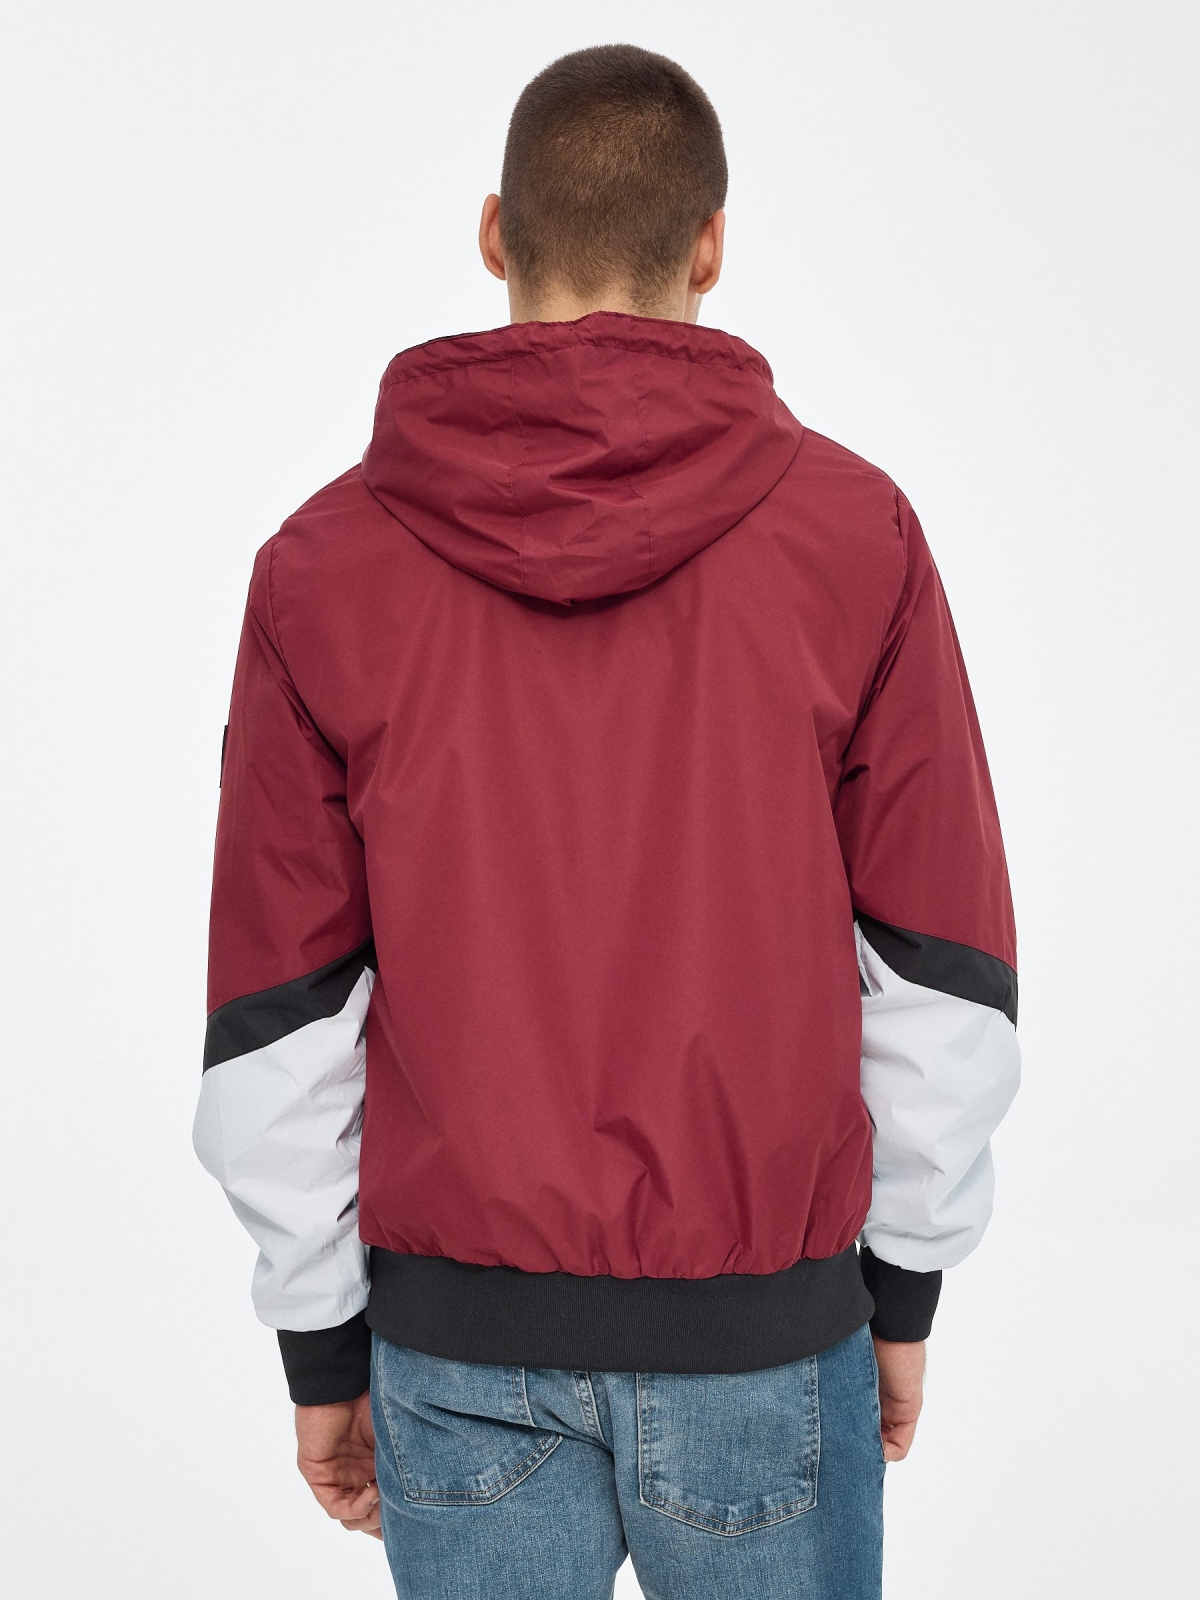 Lightweight hooded jacket white middle back view